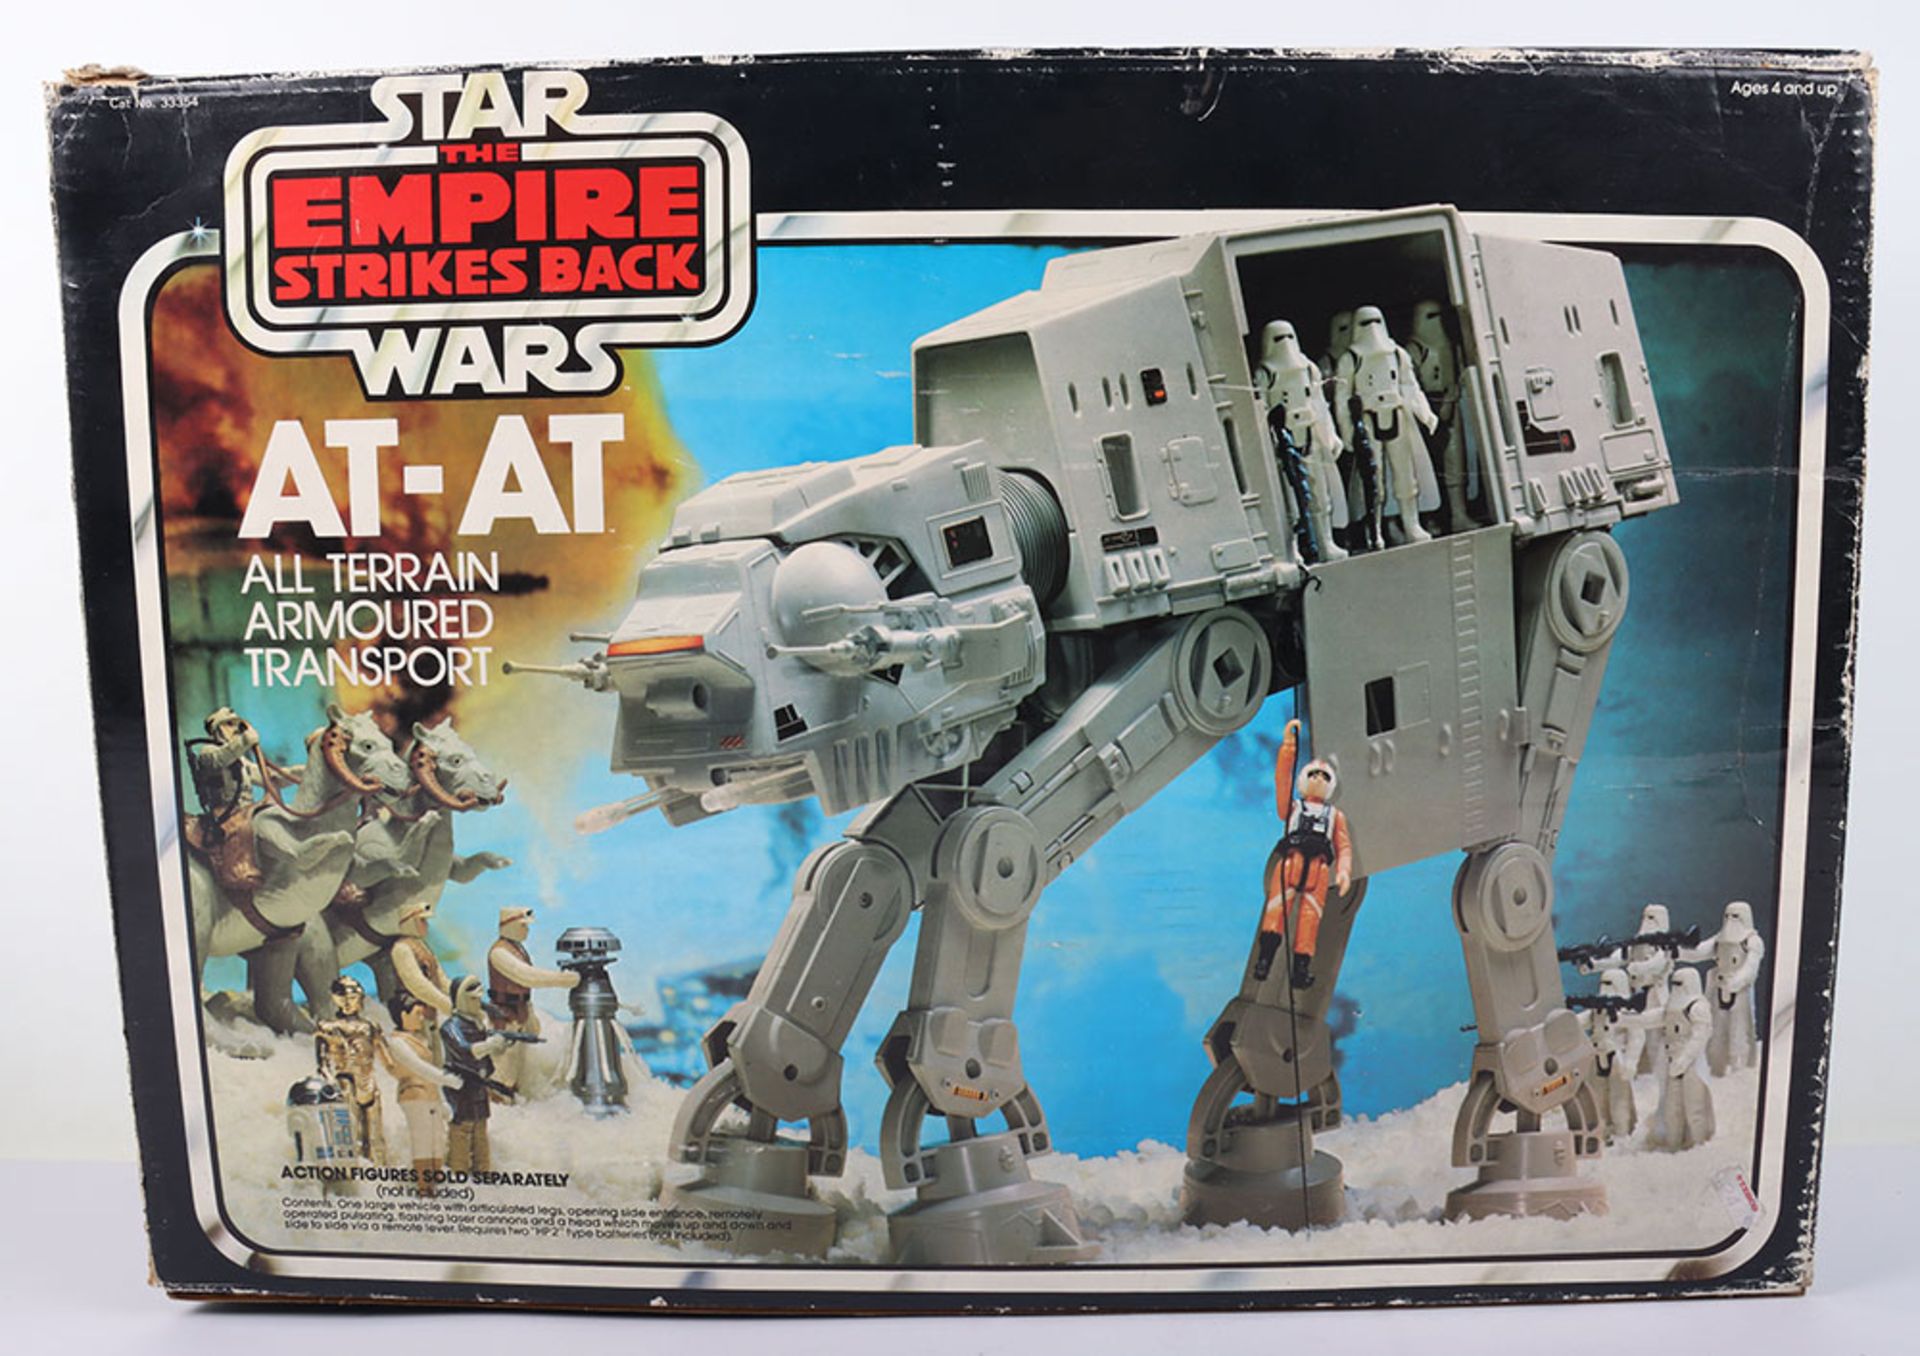 Palitoy Vintage Boxed Star Wars ‘The Empire Strikes Back’ AT-AT All Terrain Armoured Transport - Image 6 of 10